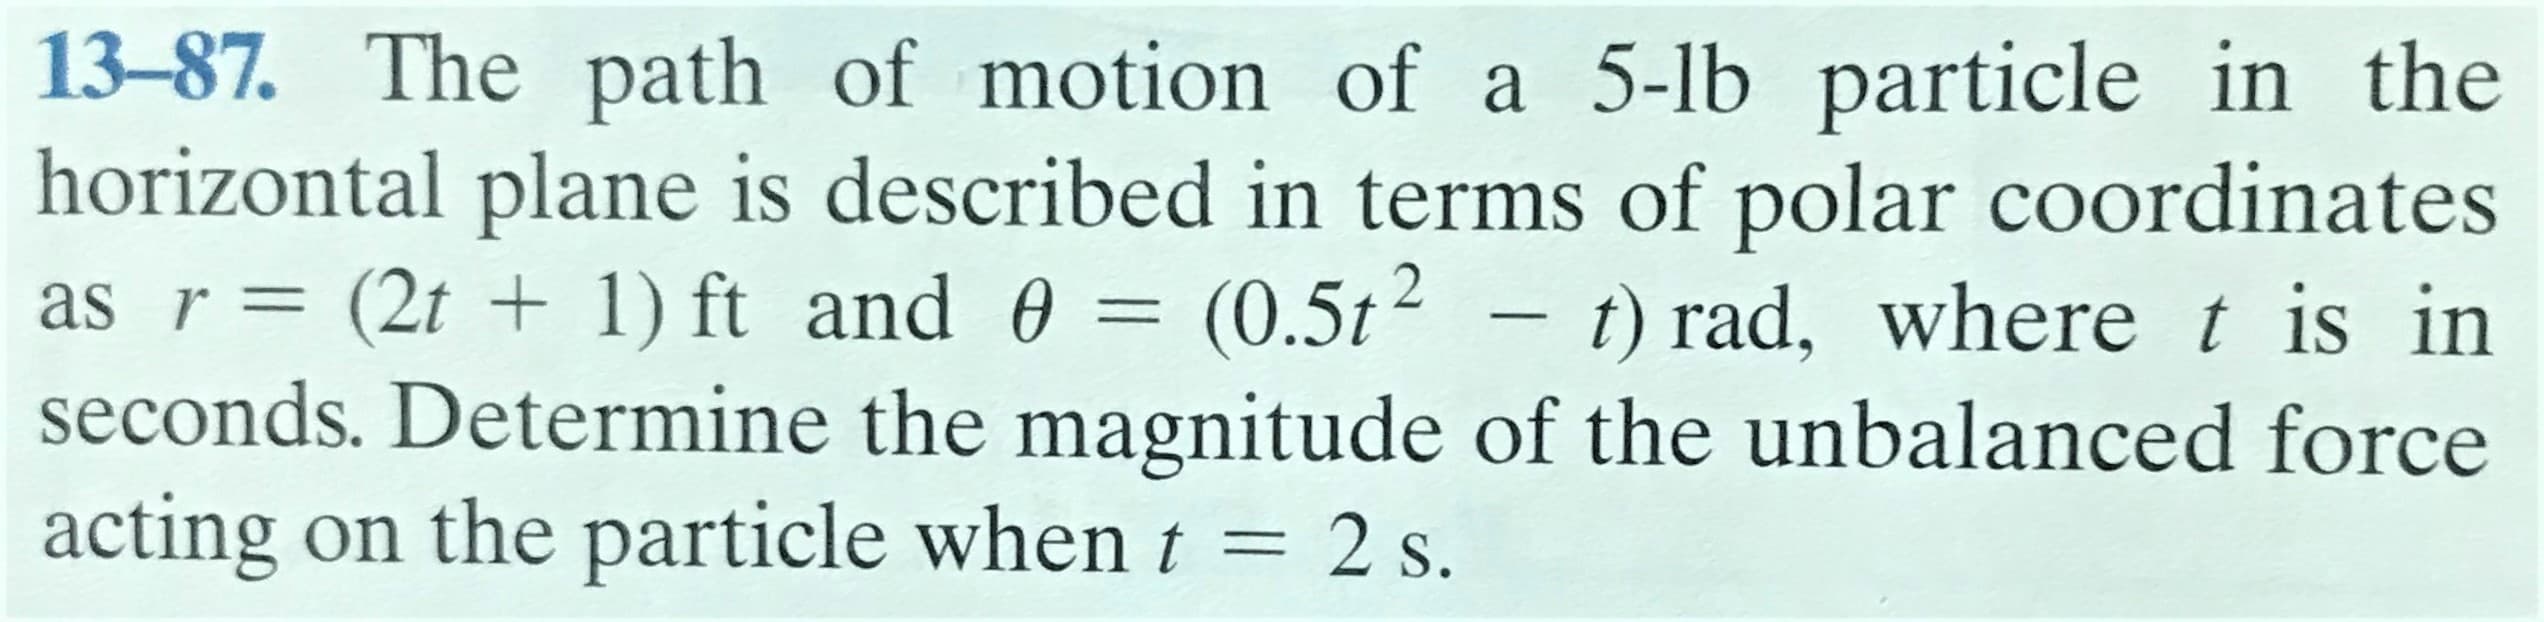 13-87. The path of motion of a 5-lb particle in the
horizontal plane is described in terms of polar coordinates
as r= (2t + 1) ft and 0 = (0.5t?
seconds. Determine the magnitude of the unbalanced force
acting on the particle when t = 2 s.
t) rad, wheret is in
%3|
-
